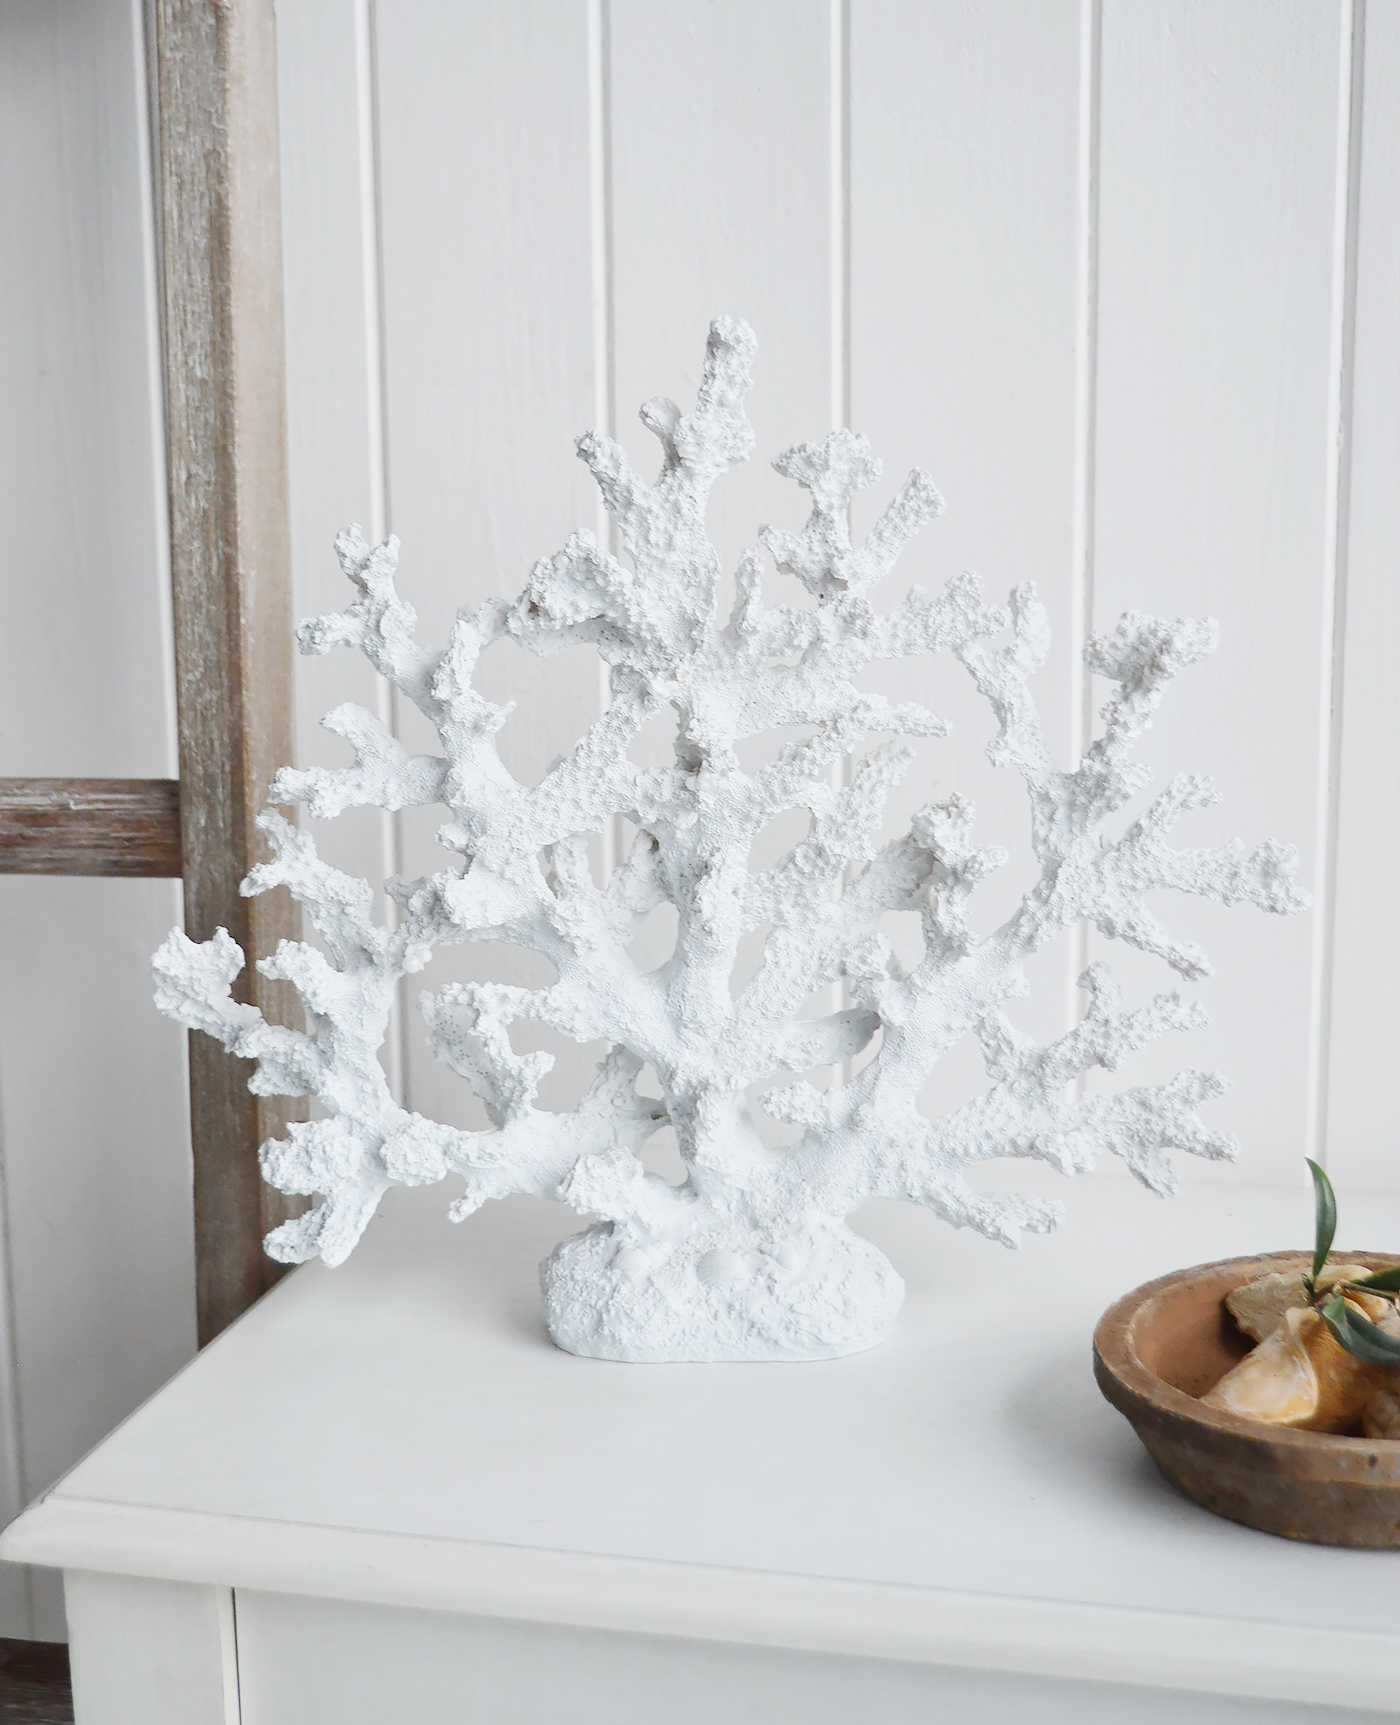 Decorative Artificial White Coral - Coffee Table Decor Elegant Coastal New England from The White Lighthouse Home. White Furniture and home decor accessories for the home interiors. New england interiors for luxury coastal home interiors